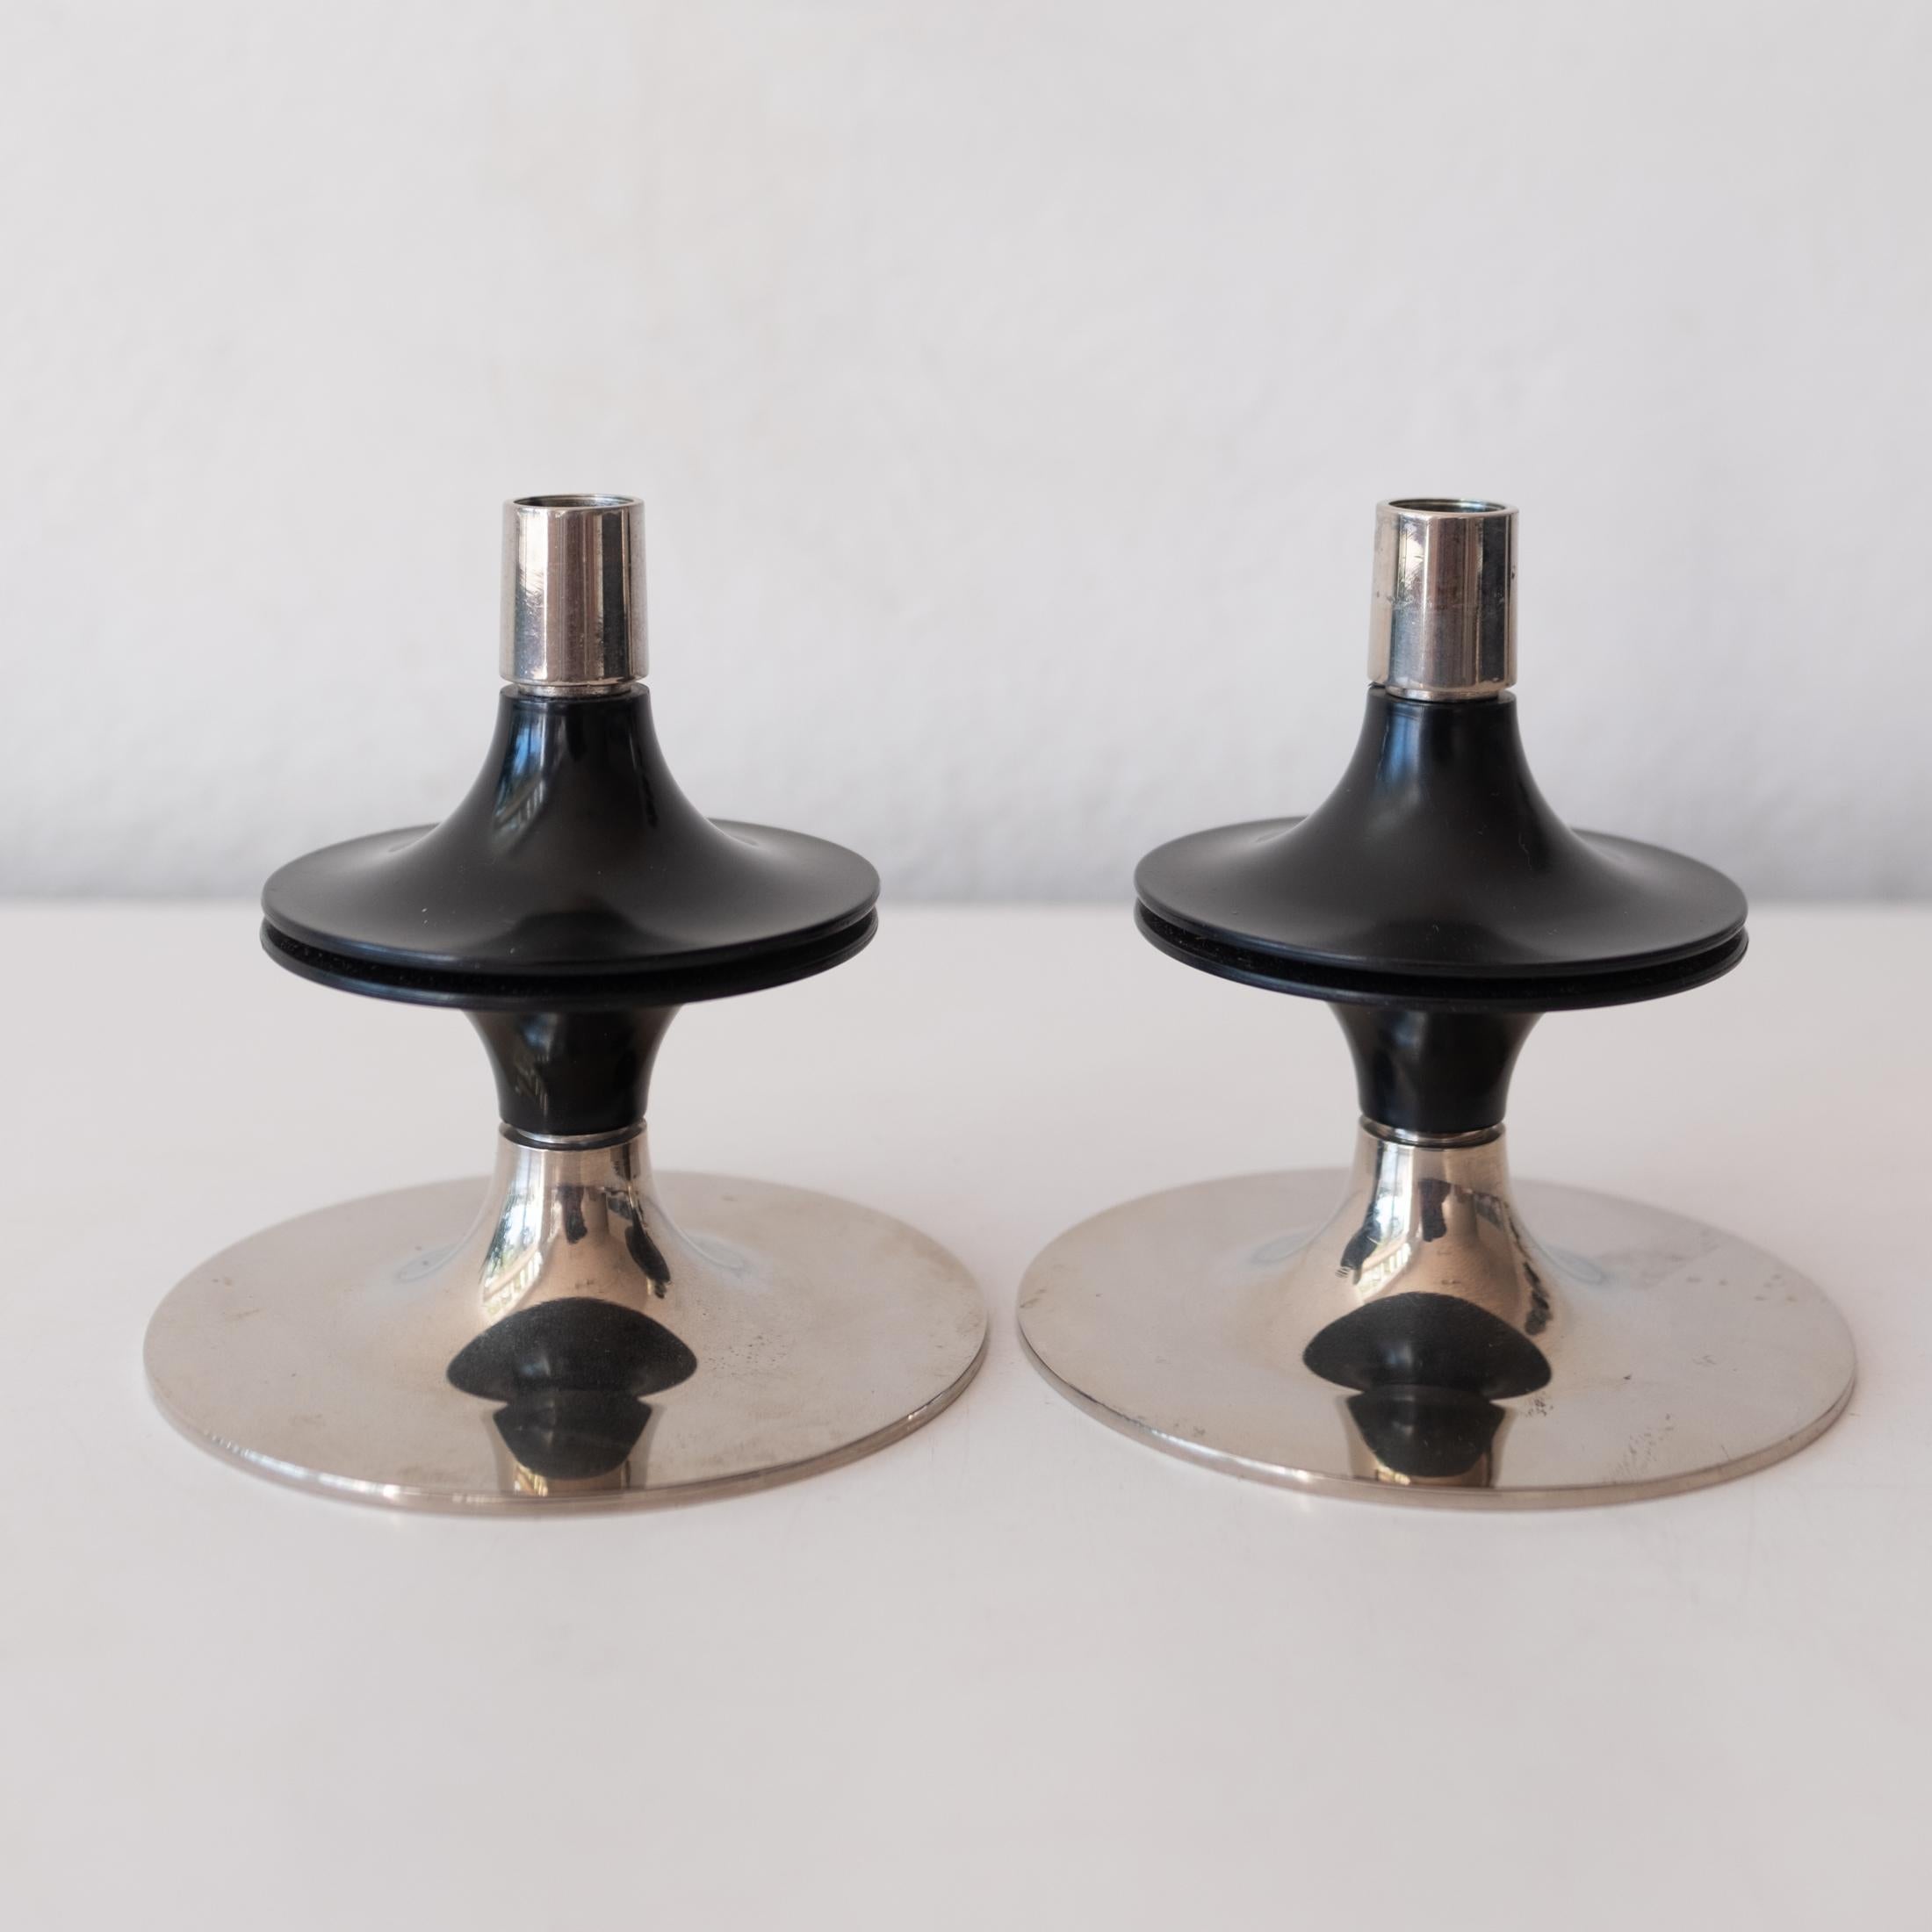 A pair of uncommon 1960s modernist stackable and modular candle holders, designed by Werner Stoff and commissioned by Hans Nagel for Gebrüder Nagel AG, Wesseling, Germany. This set can be combined with the more common Nagel modular candle